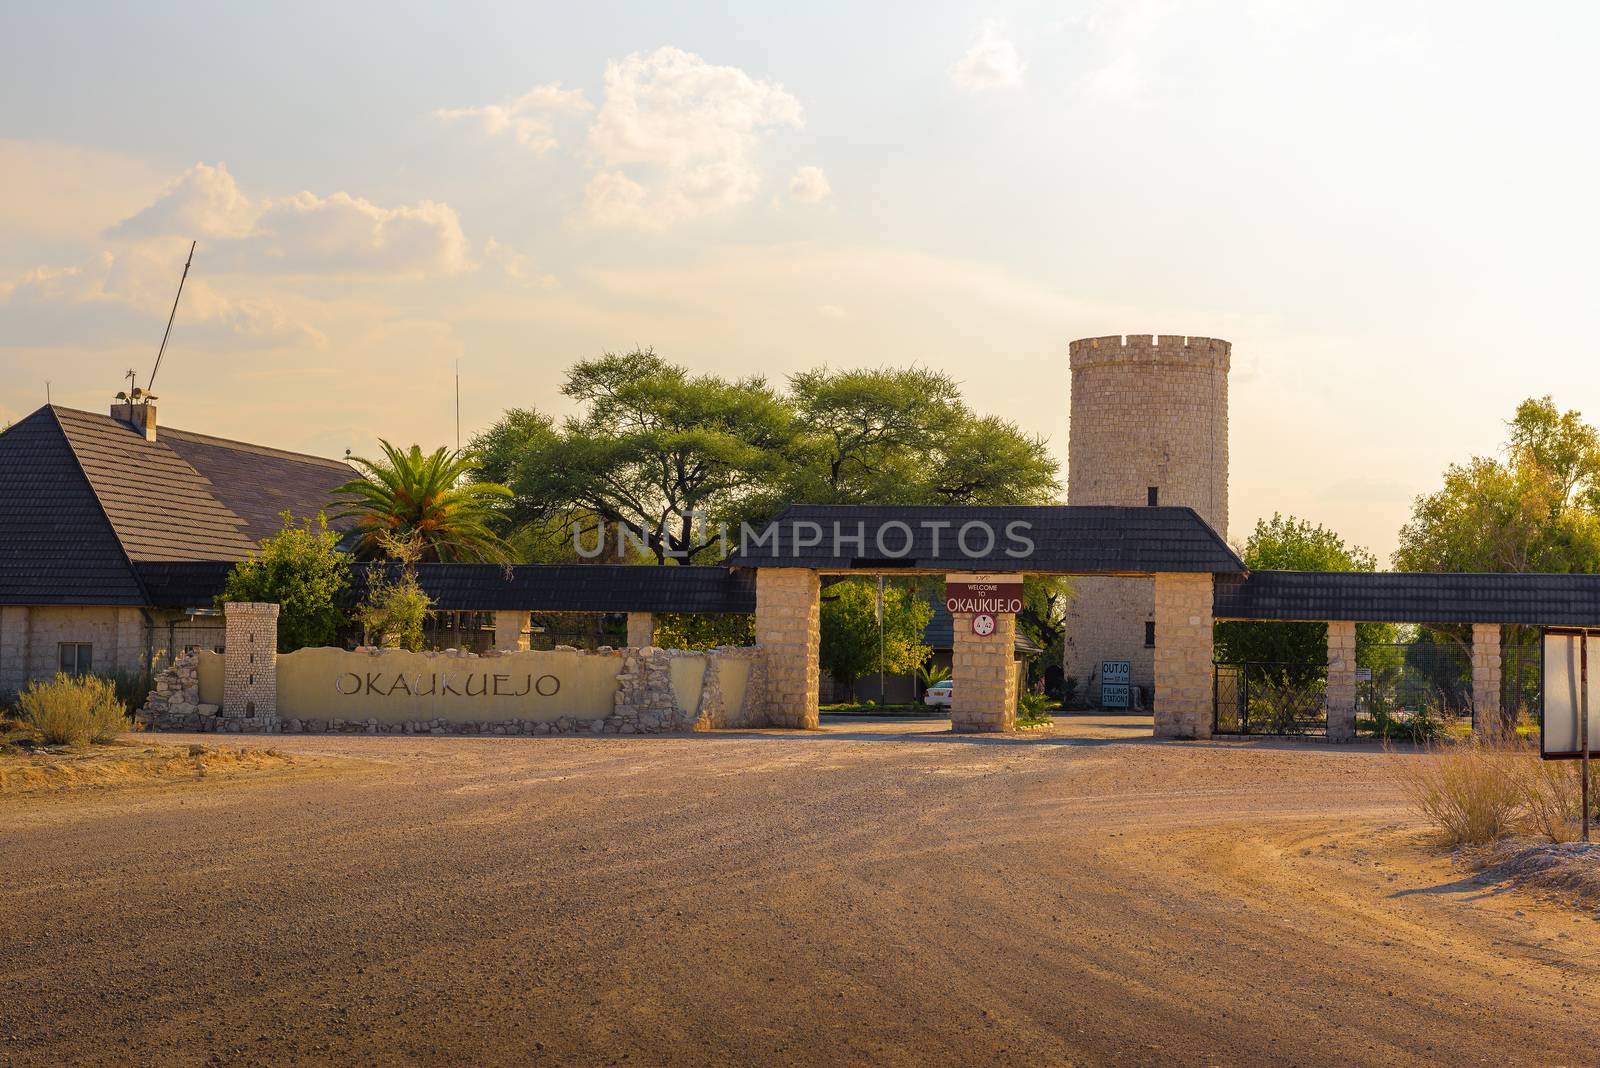 Entry gate of the Okaukuejo resort and campsite in Etosha National Park by nickfox